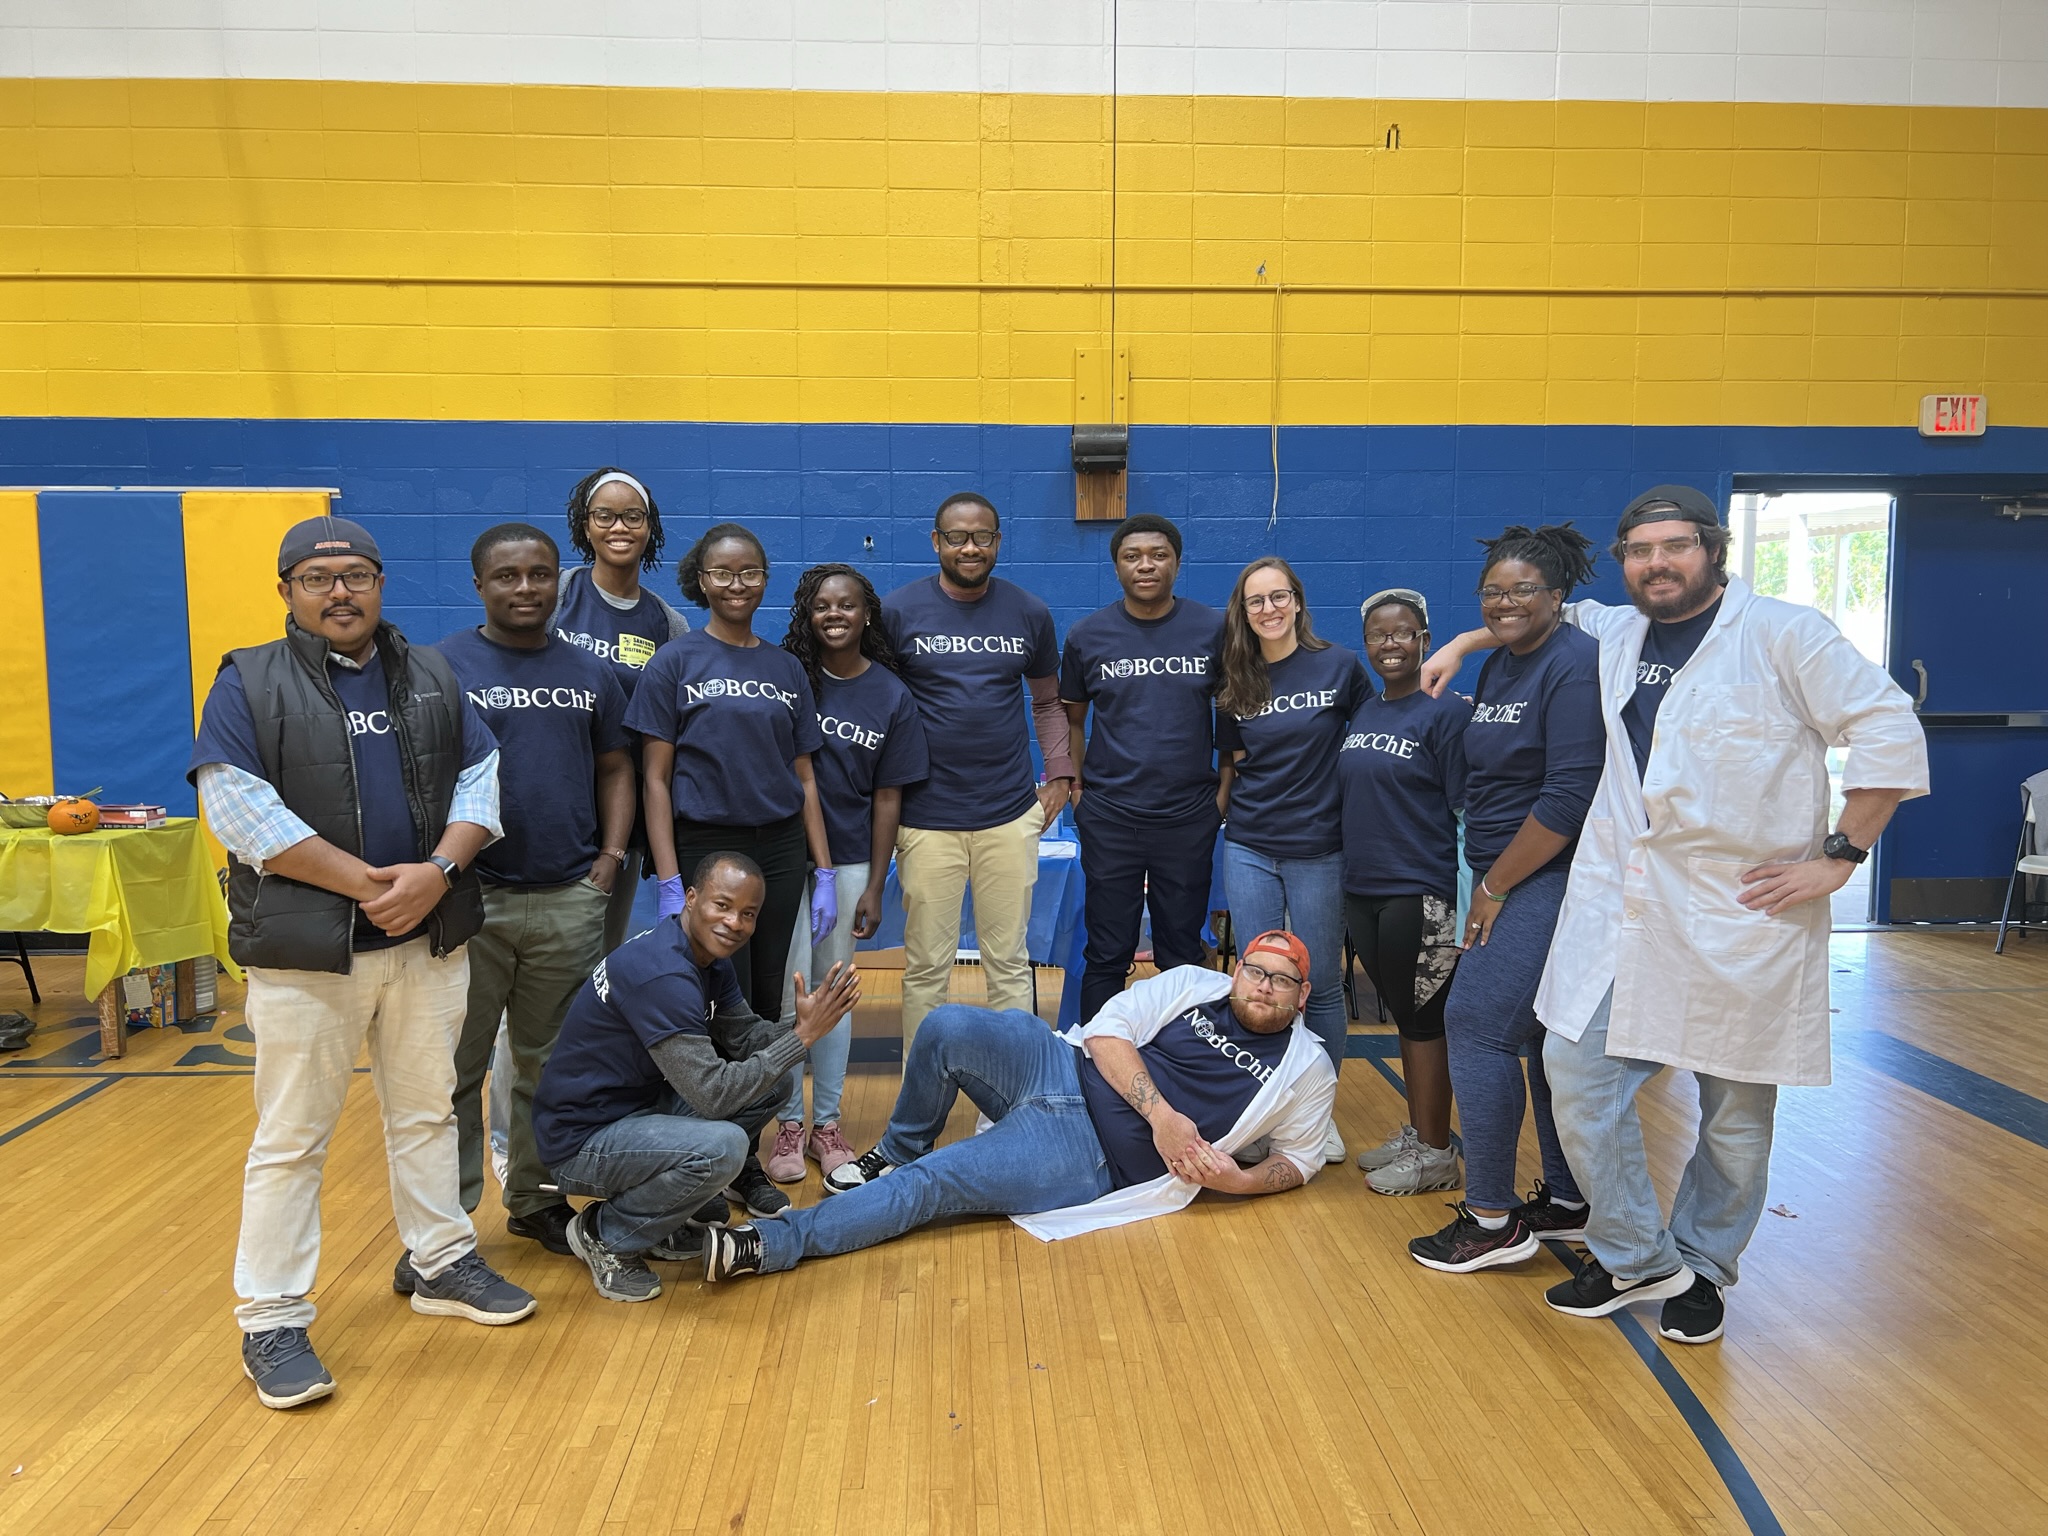 Elephant toothpaste, flaming gummy bears and exploding pumpkins – oh my! Auburn University chemistry students inspire next generation of scientists through engaging outreach activities.